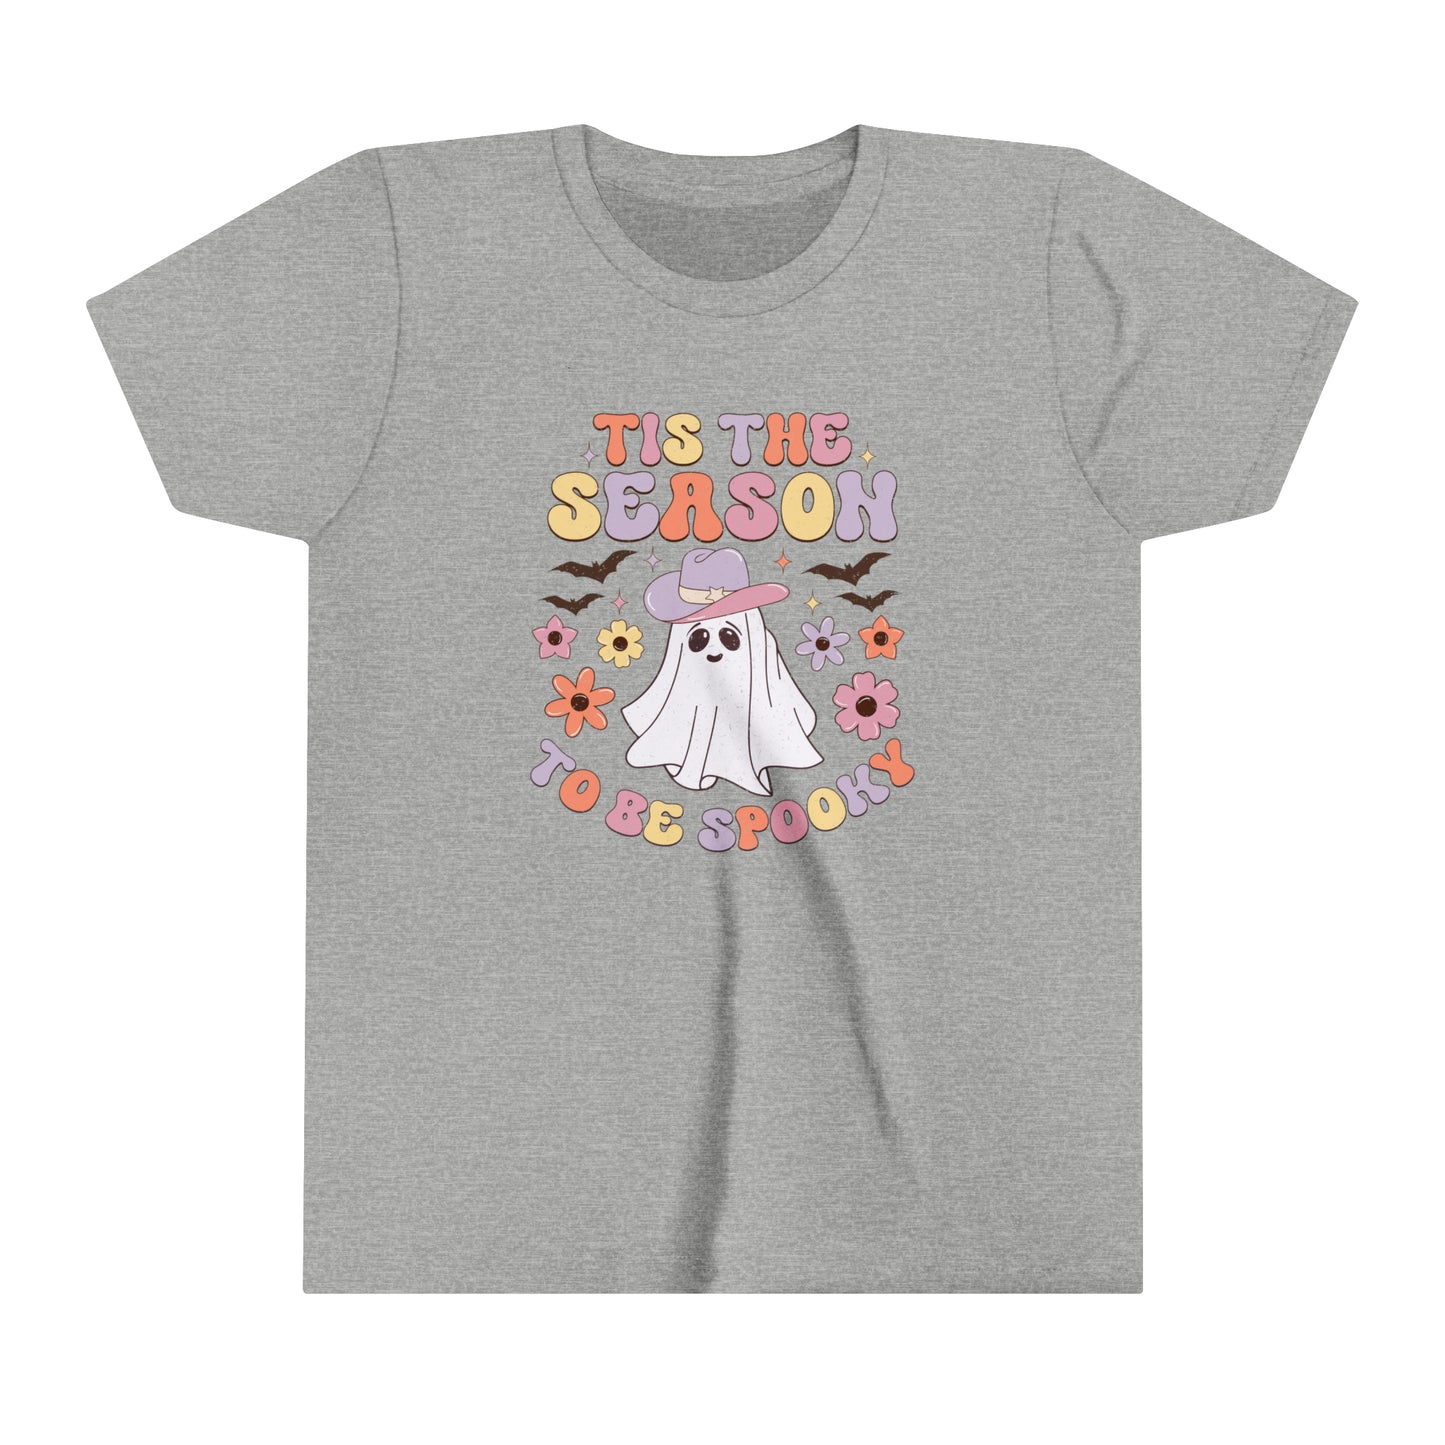 'Tis the season to be spooky Girl's Youth Short Sleeve Tee